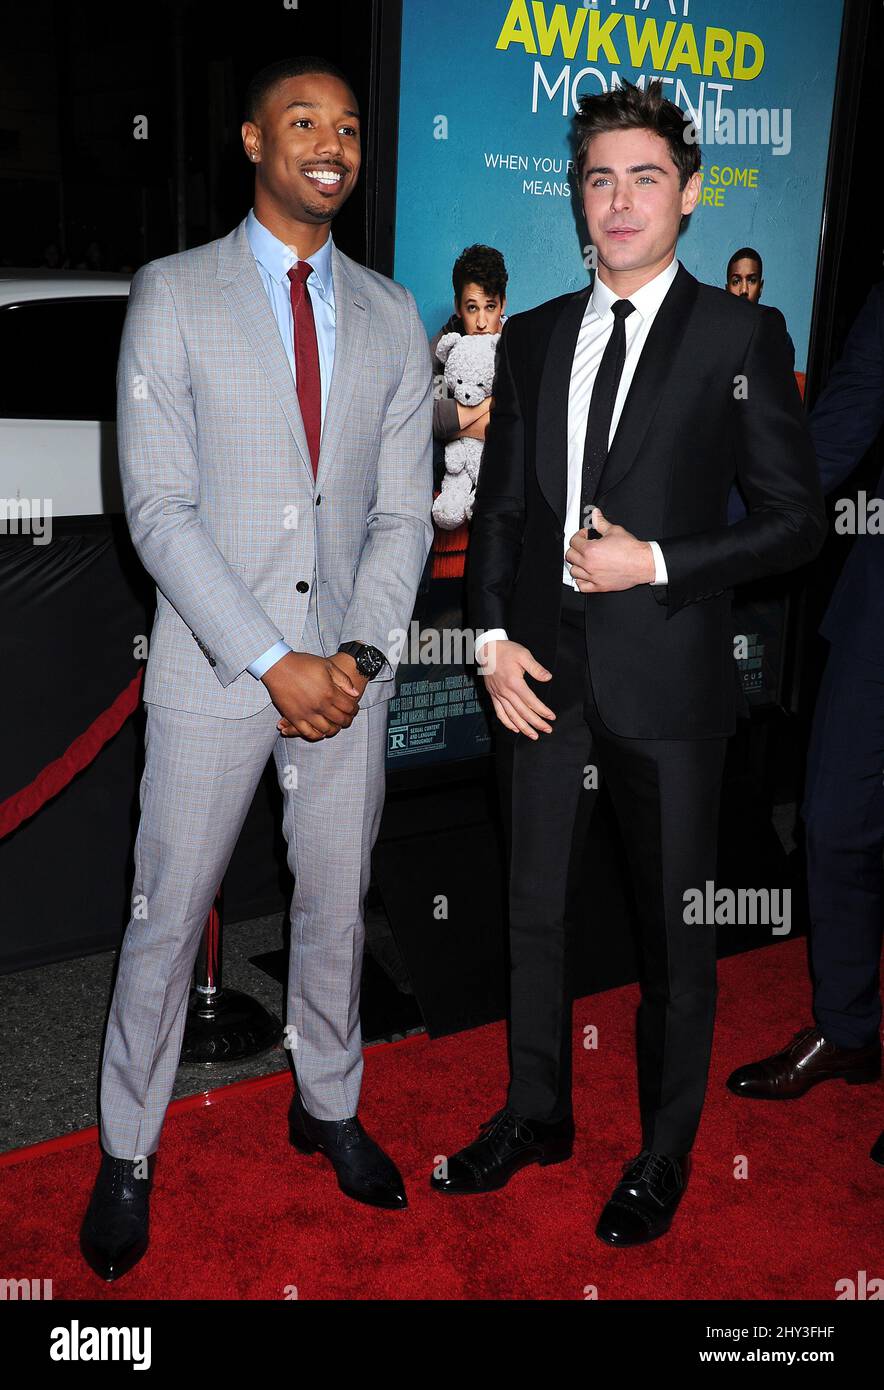 Michael B. Jordan and Zac Efron at the premiere for 'That Awkward Moment'  held at Regal Cinemas, Los Angeles Stock Photo - Alamy